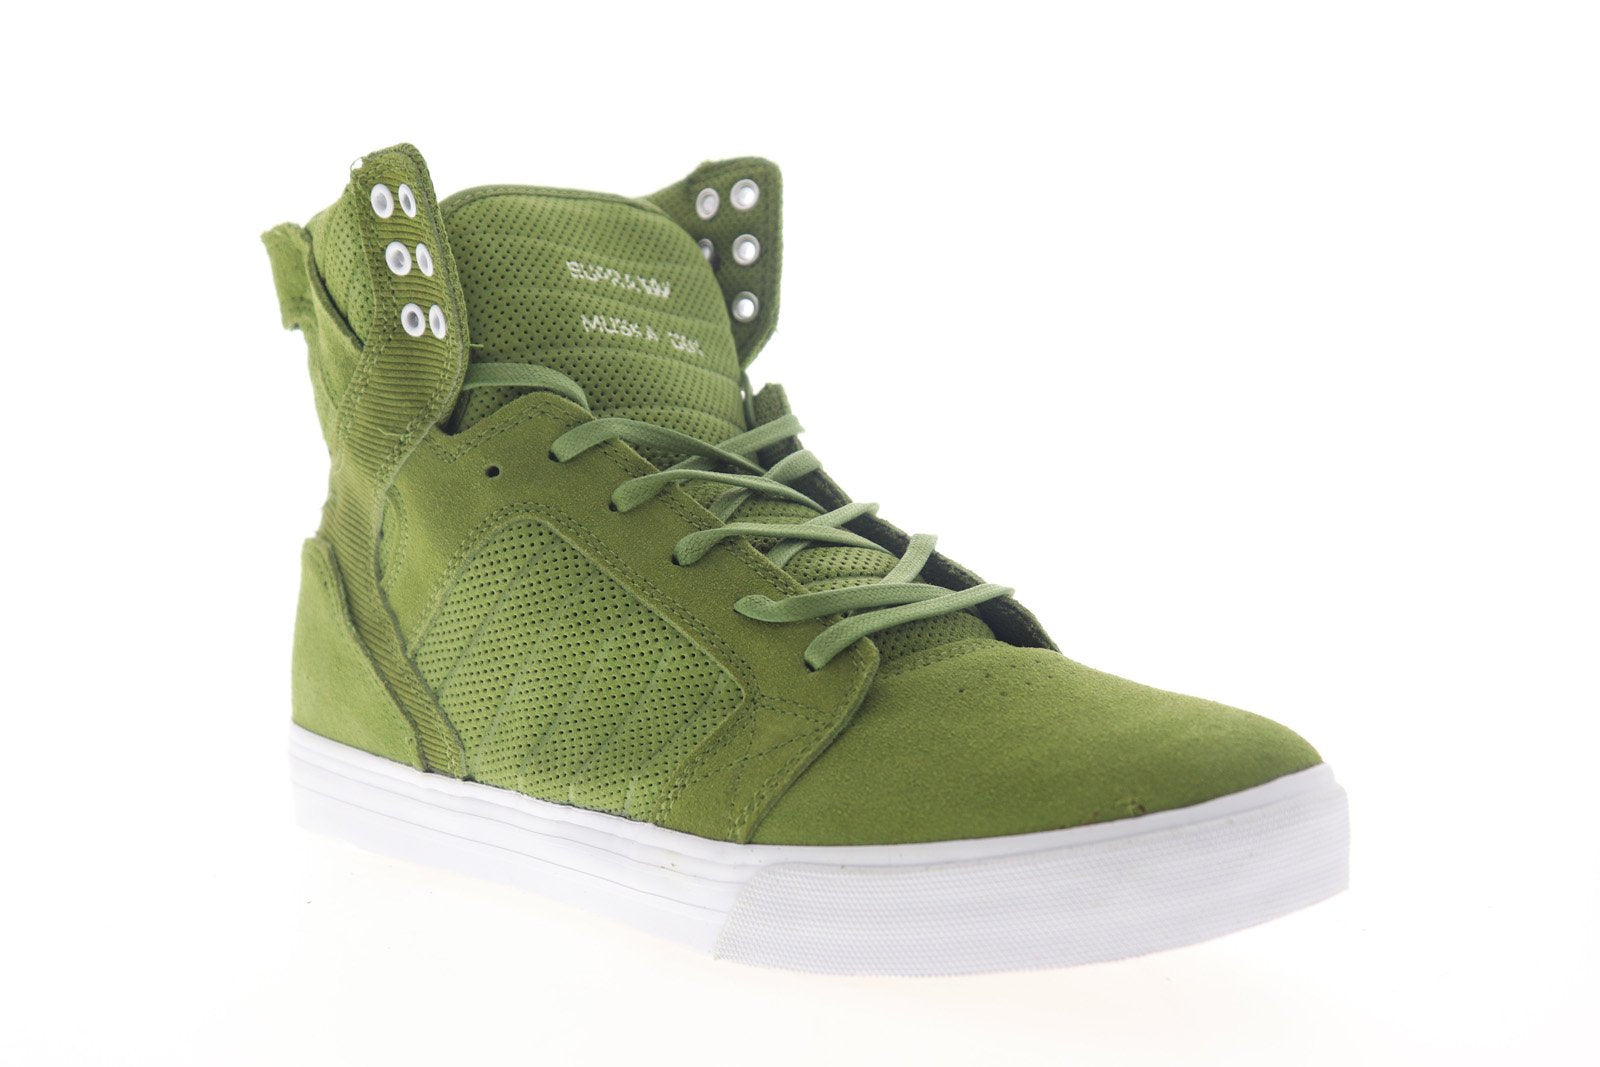 08003-371-M Mens Green Suede Top Lace Up Skate Sneak - Ruze Shoes